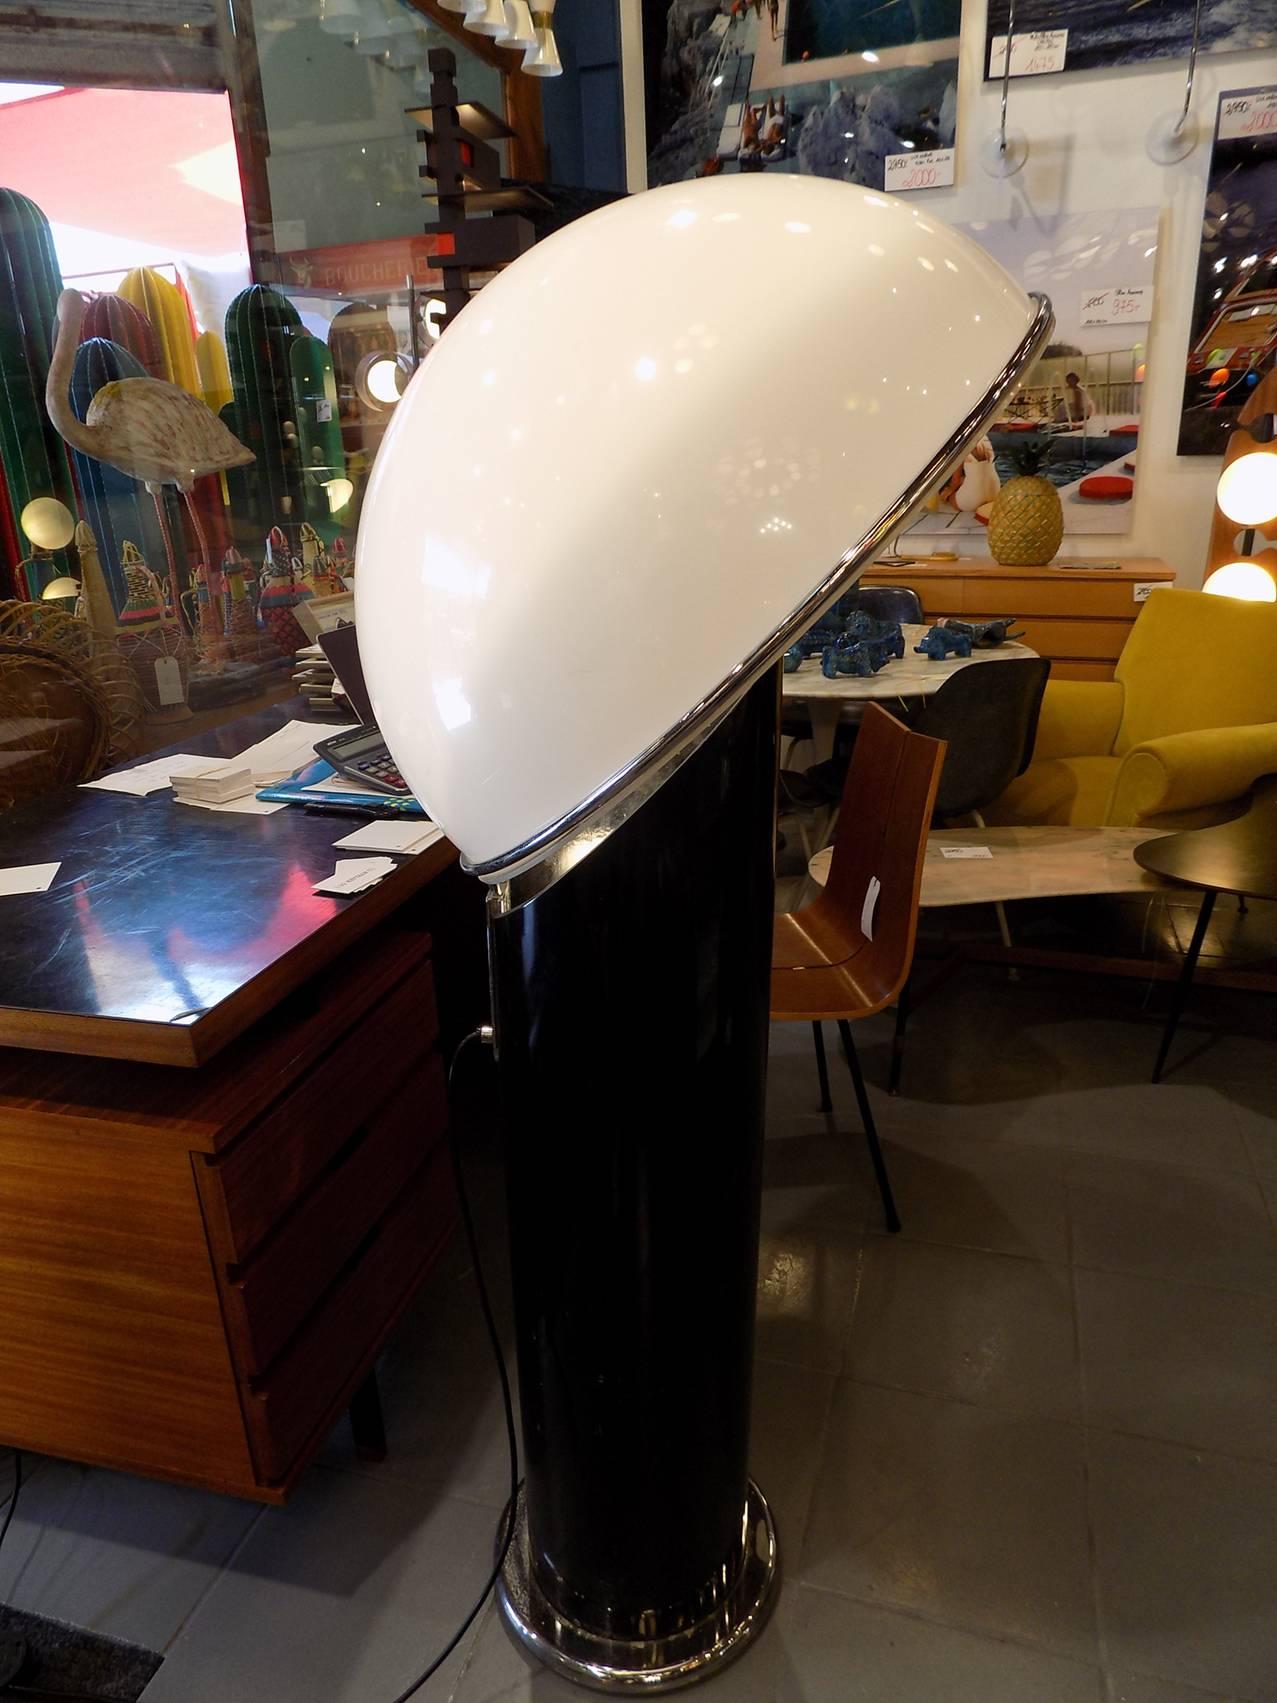 This Ciot floor lamp was designed by Ennio Chiggio and manufactured by Lumenform in Italy. The base and shade are made from black and white plastic with a chrome base. It is in a good vintage condition.